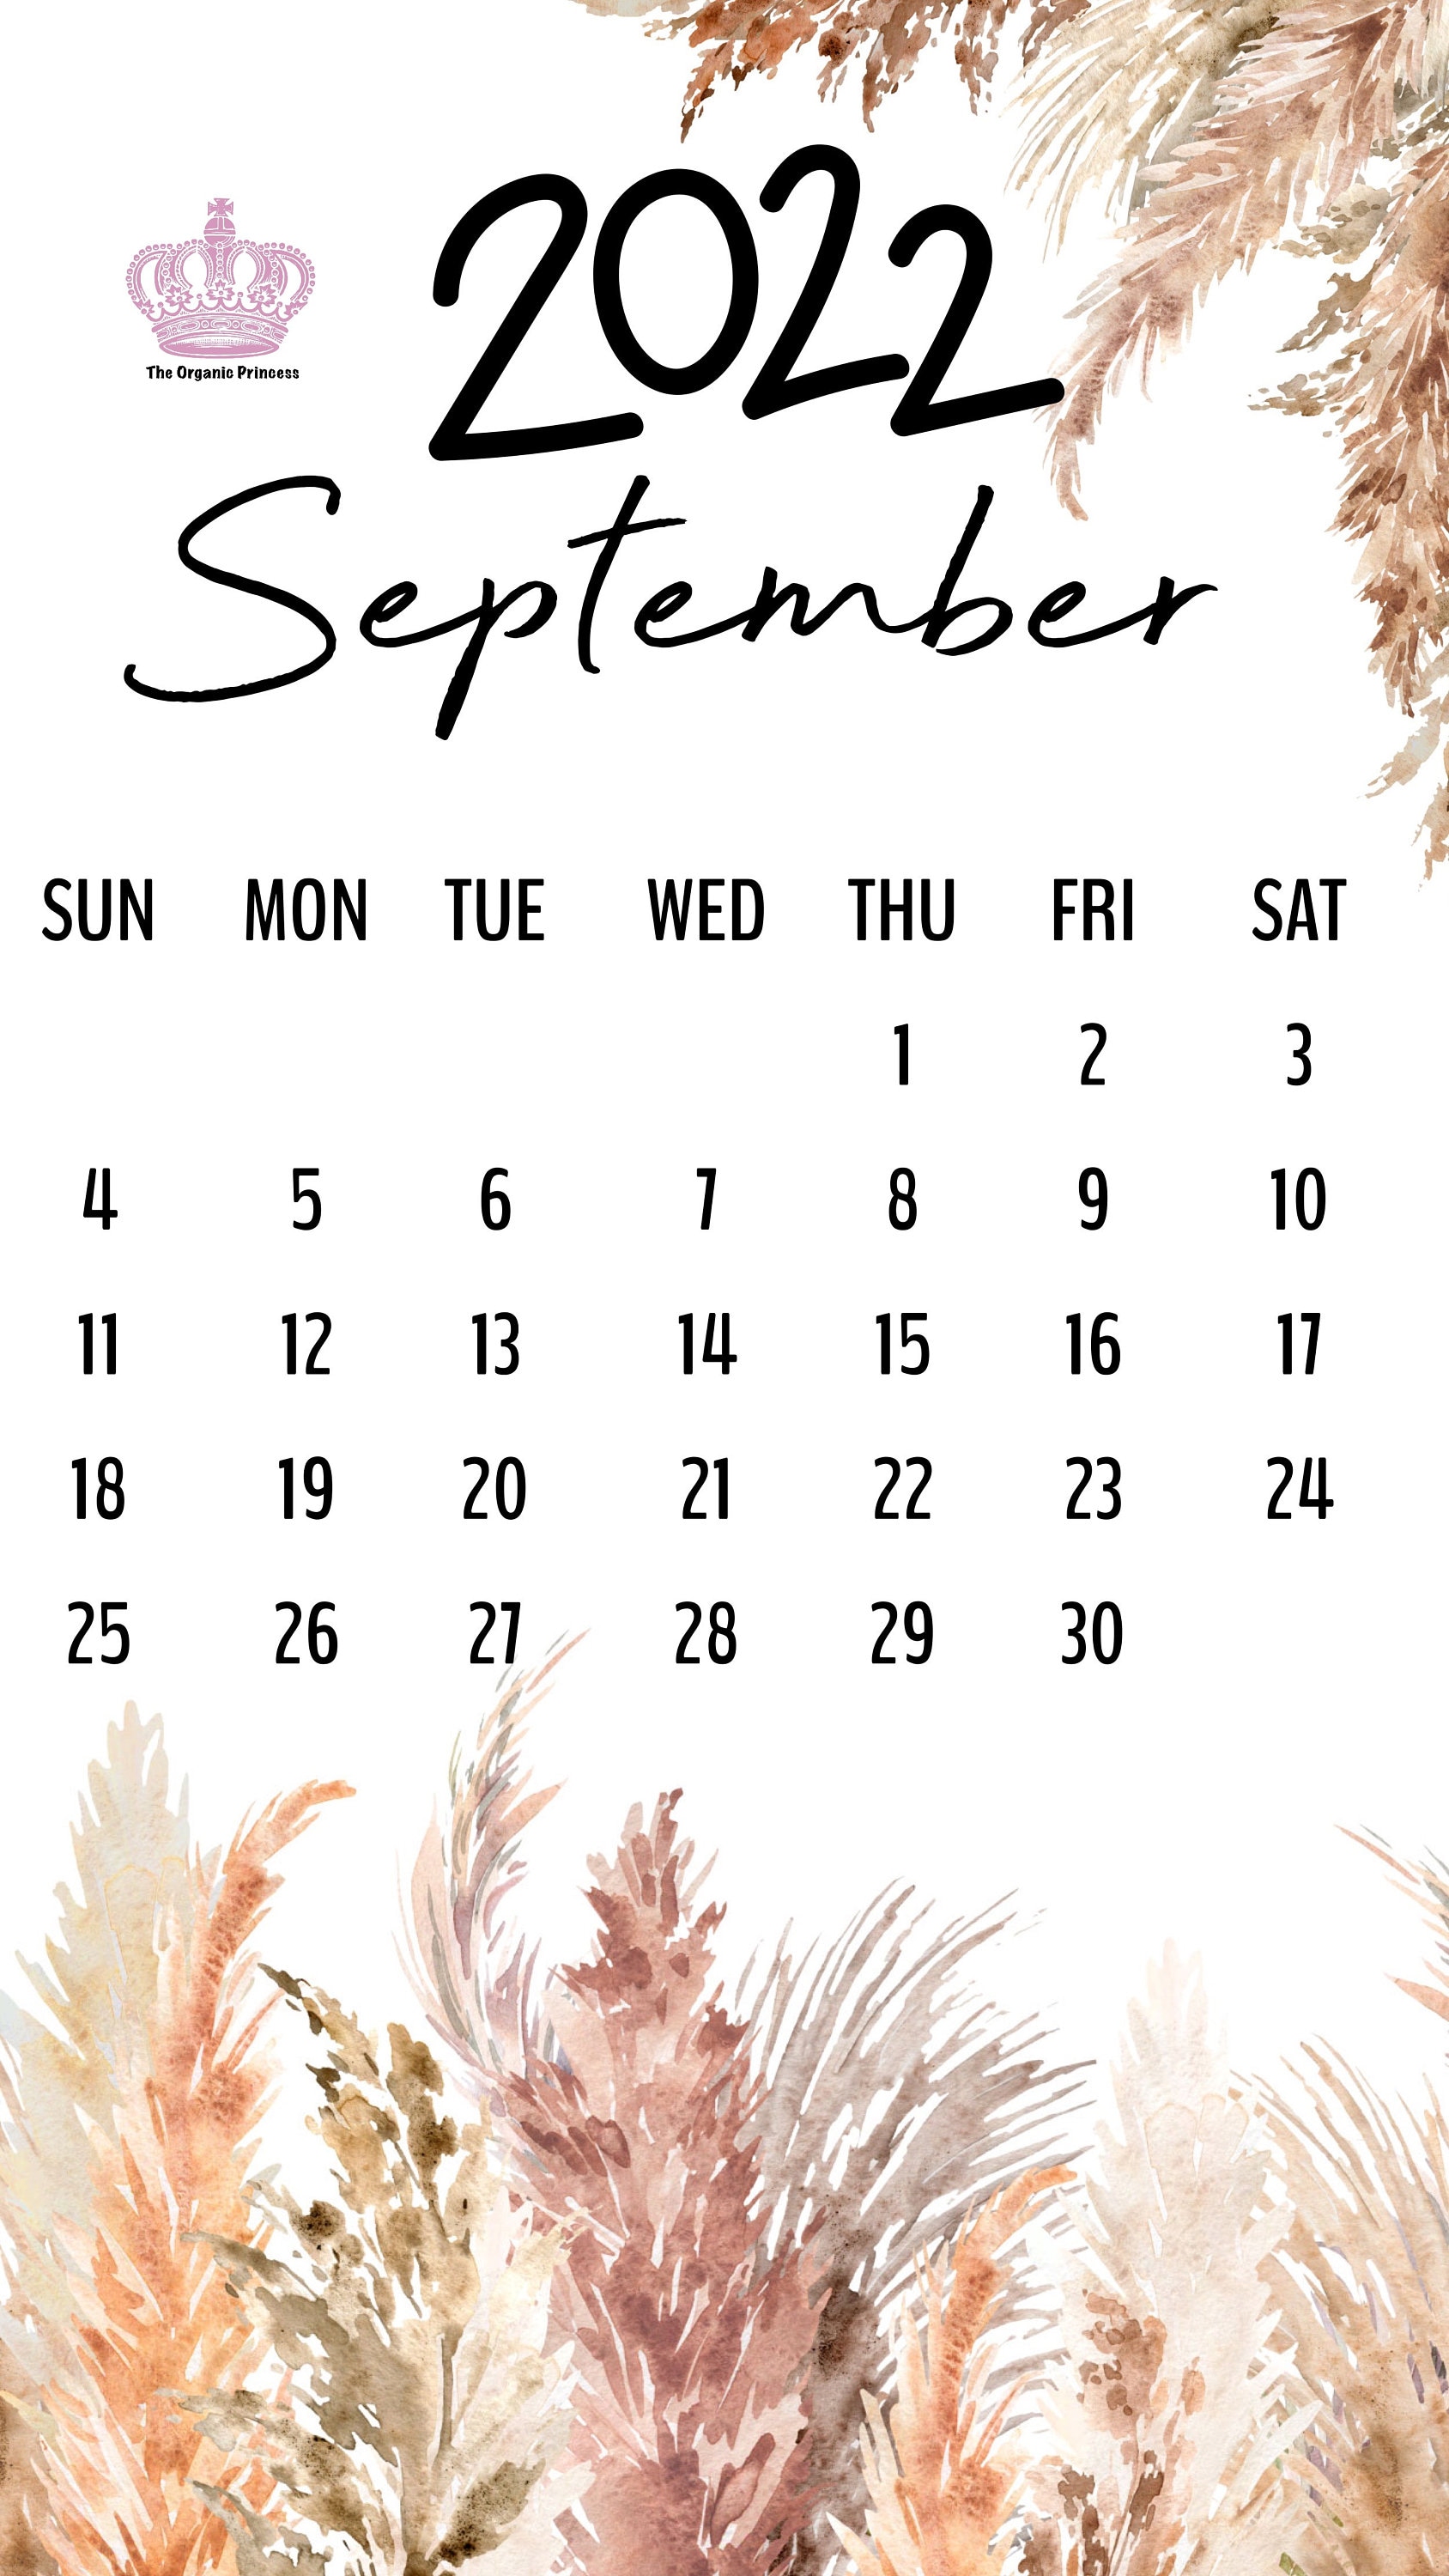 September 2022 Wallpapers Calendar Backgrounds Iphone Android